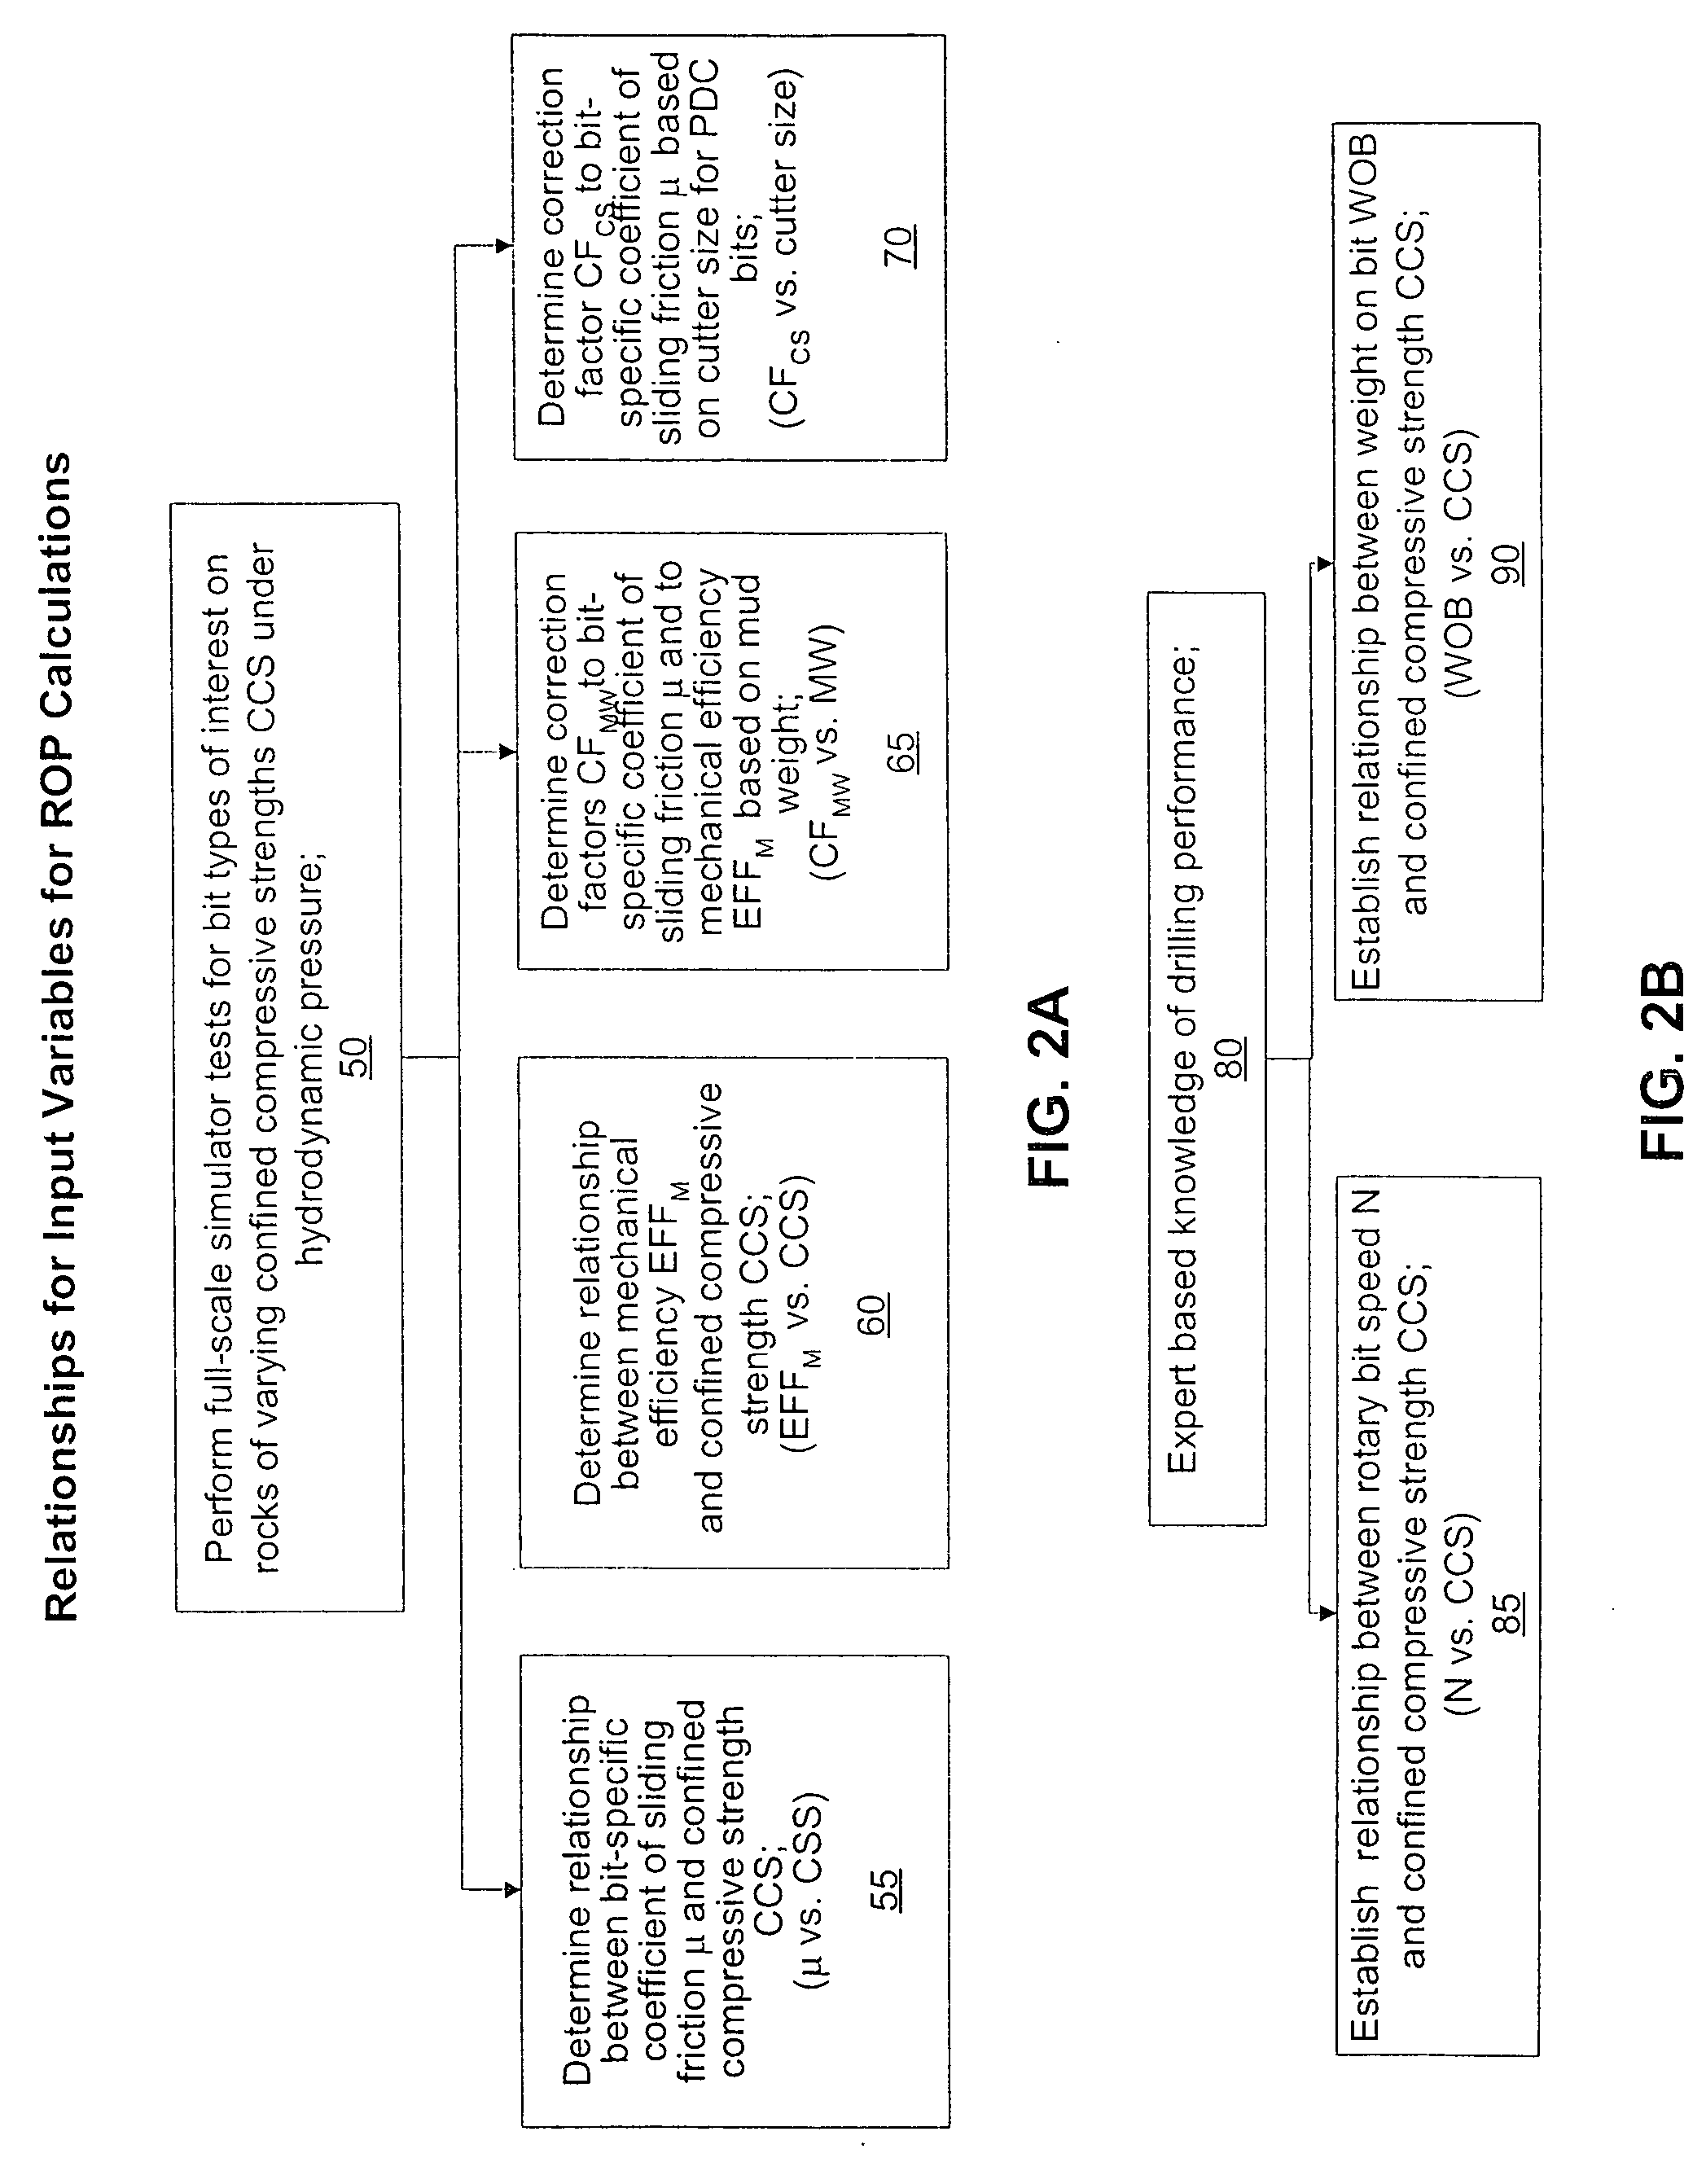 Method for predicting rate of penetration using bit-specific coefficient of sliding friction and mechanical efficiency as a function of confined compressive strength